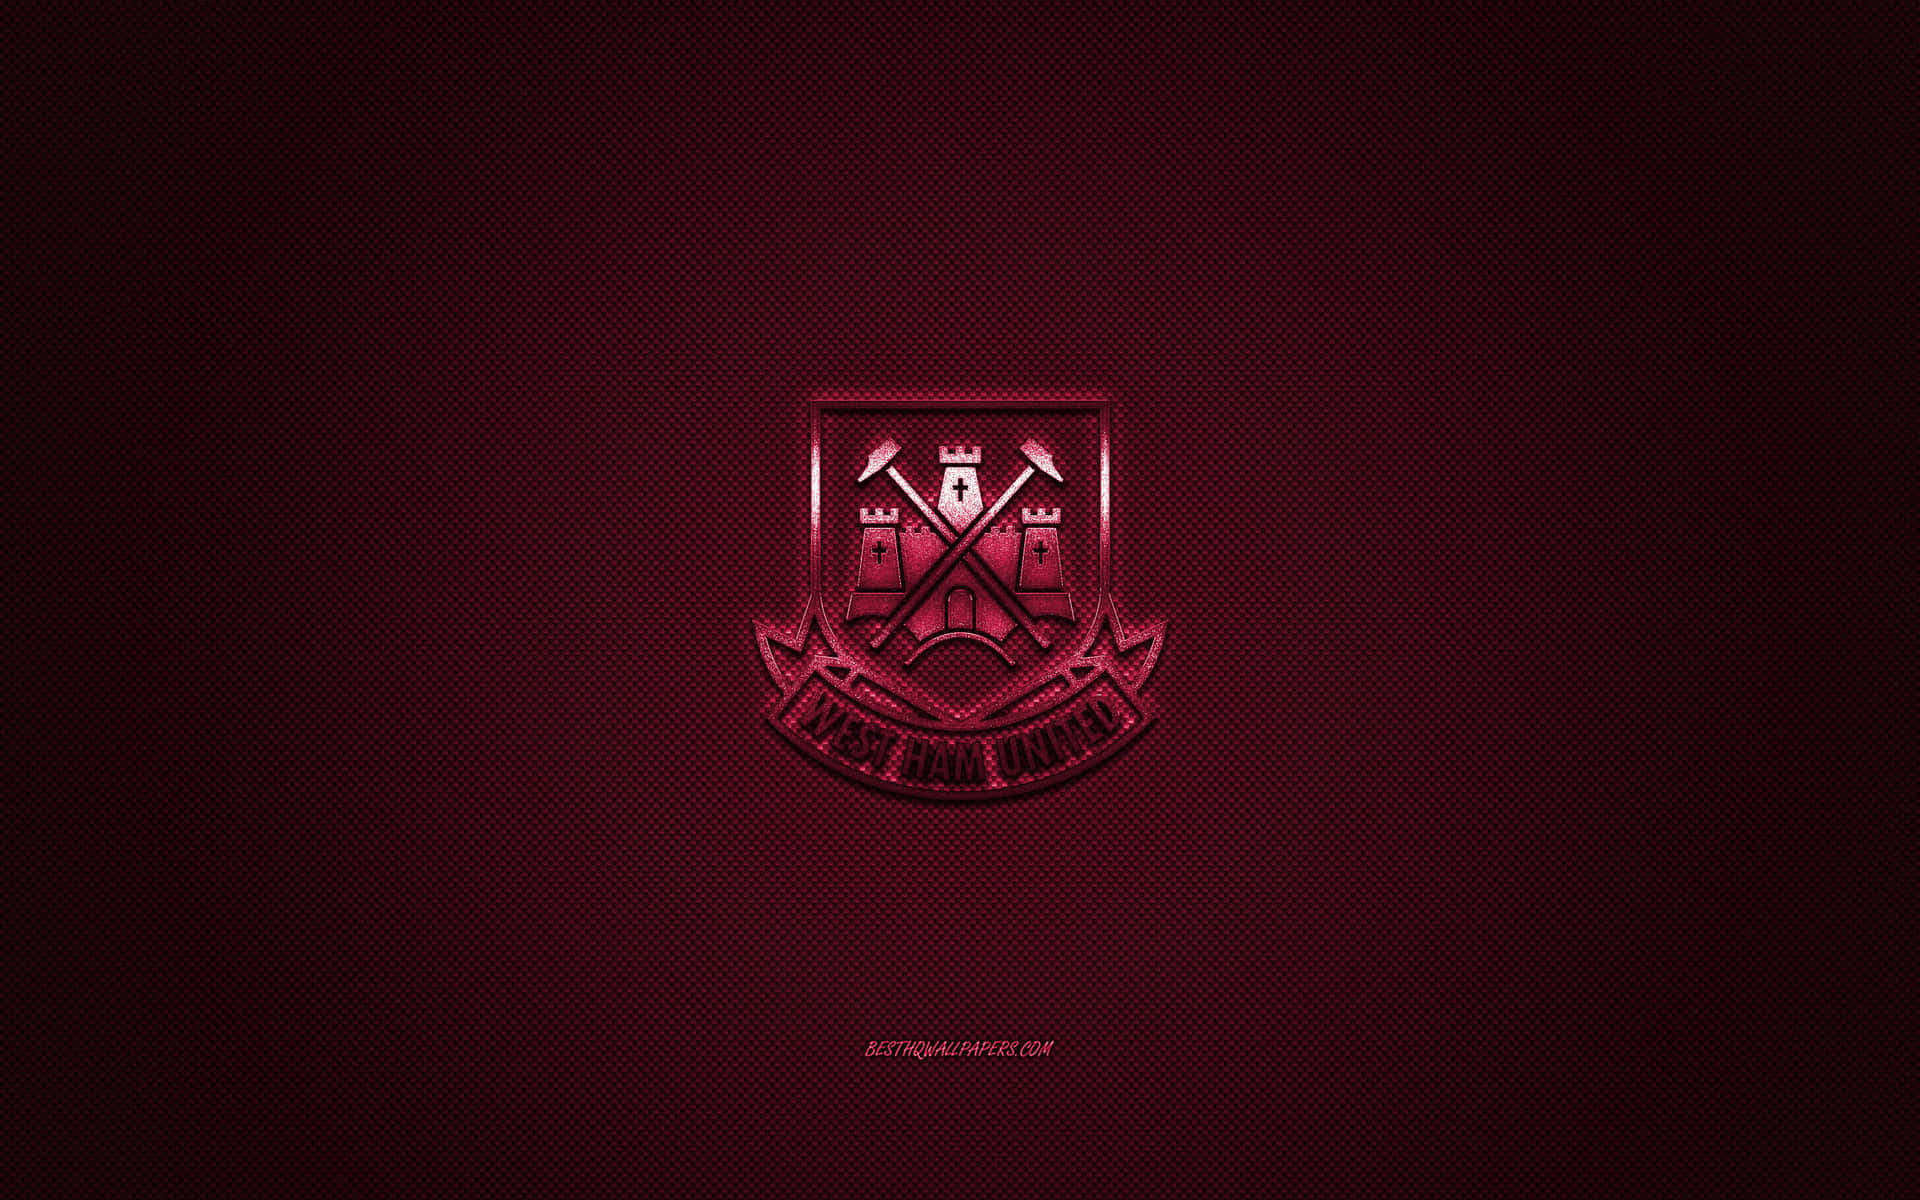 Download West Ham United Fc Team In Action Wallpaper | Wallpapers.com